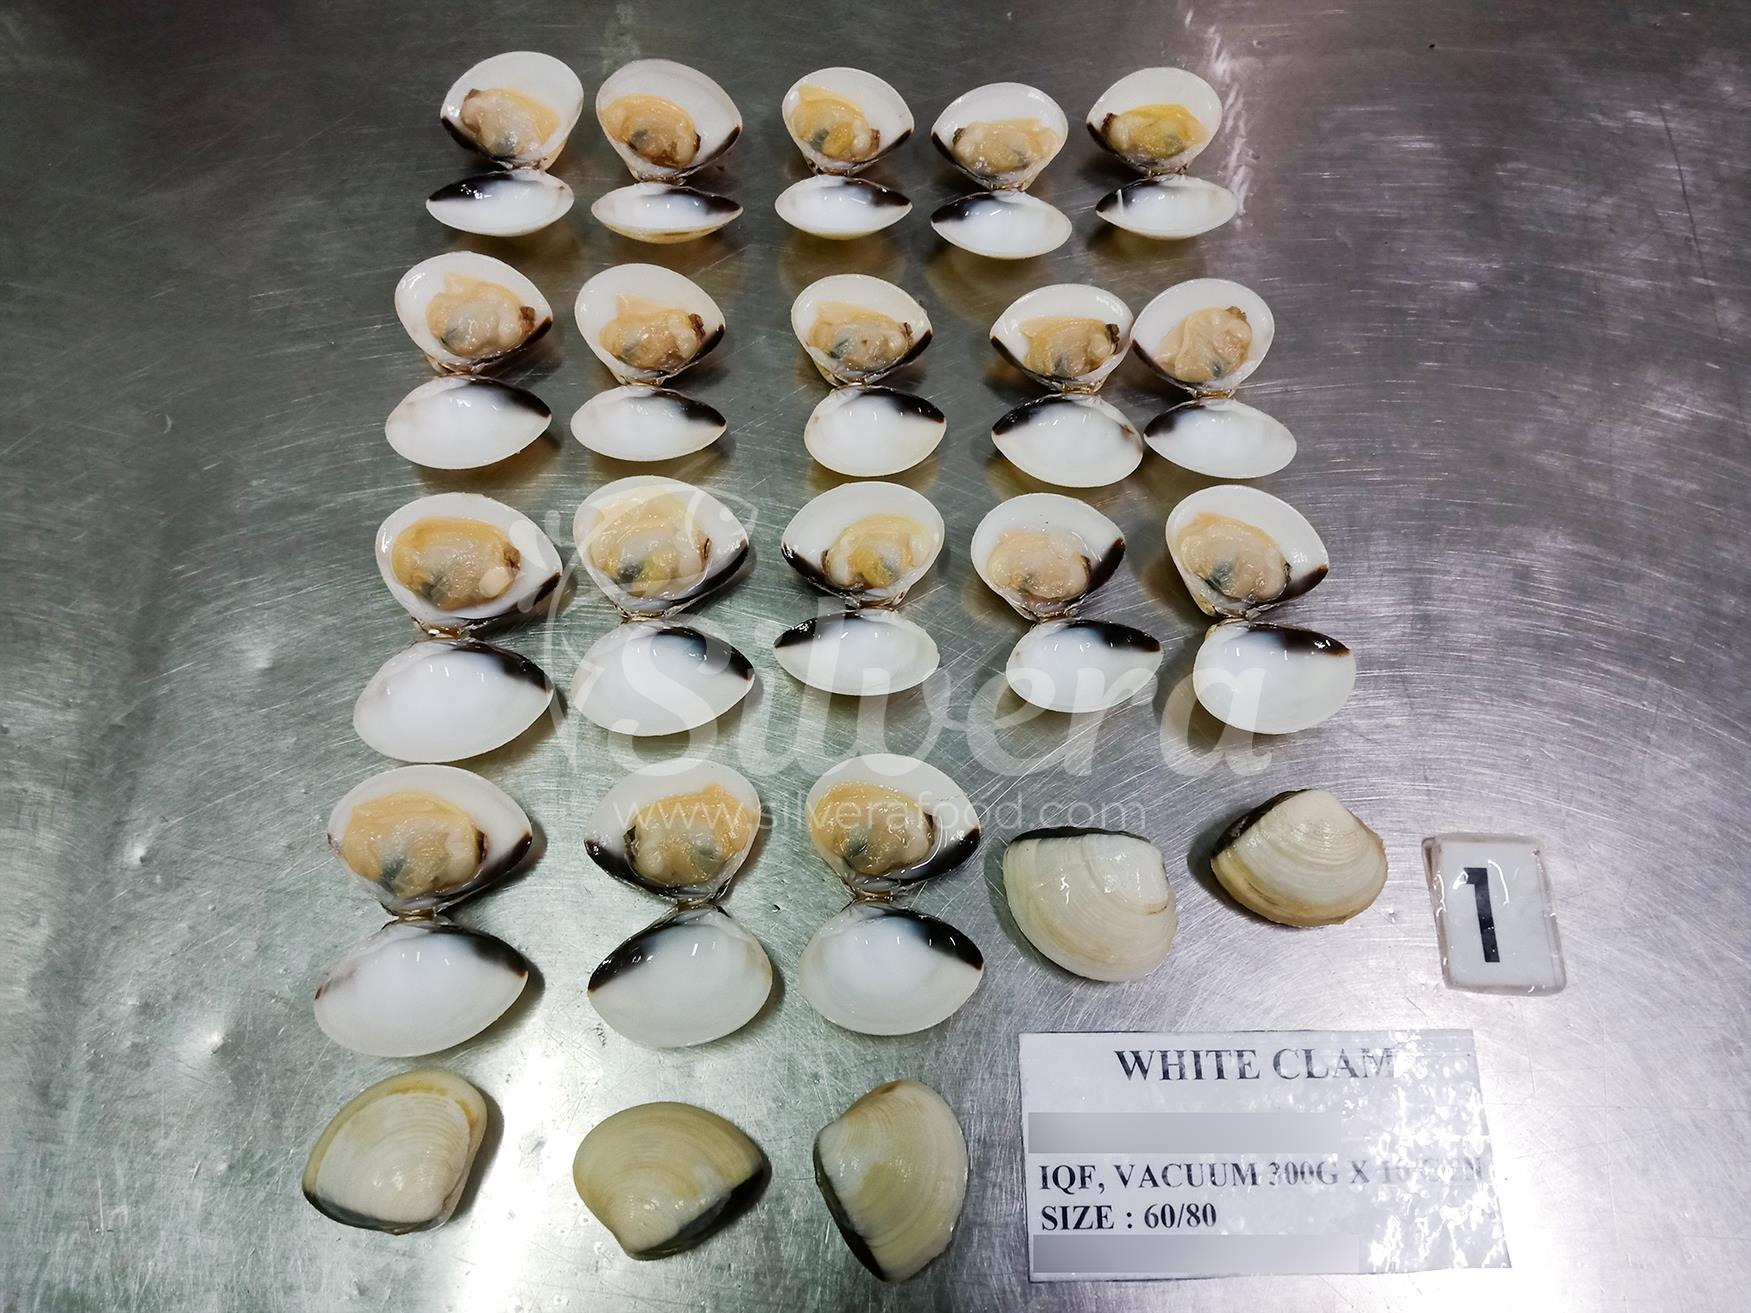 Defrosted cooked whole white clams 